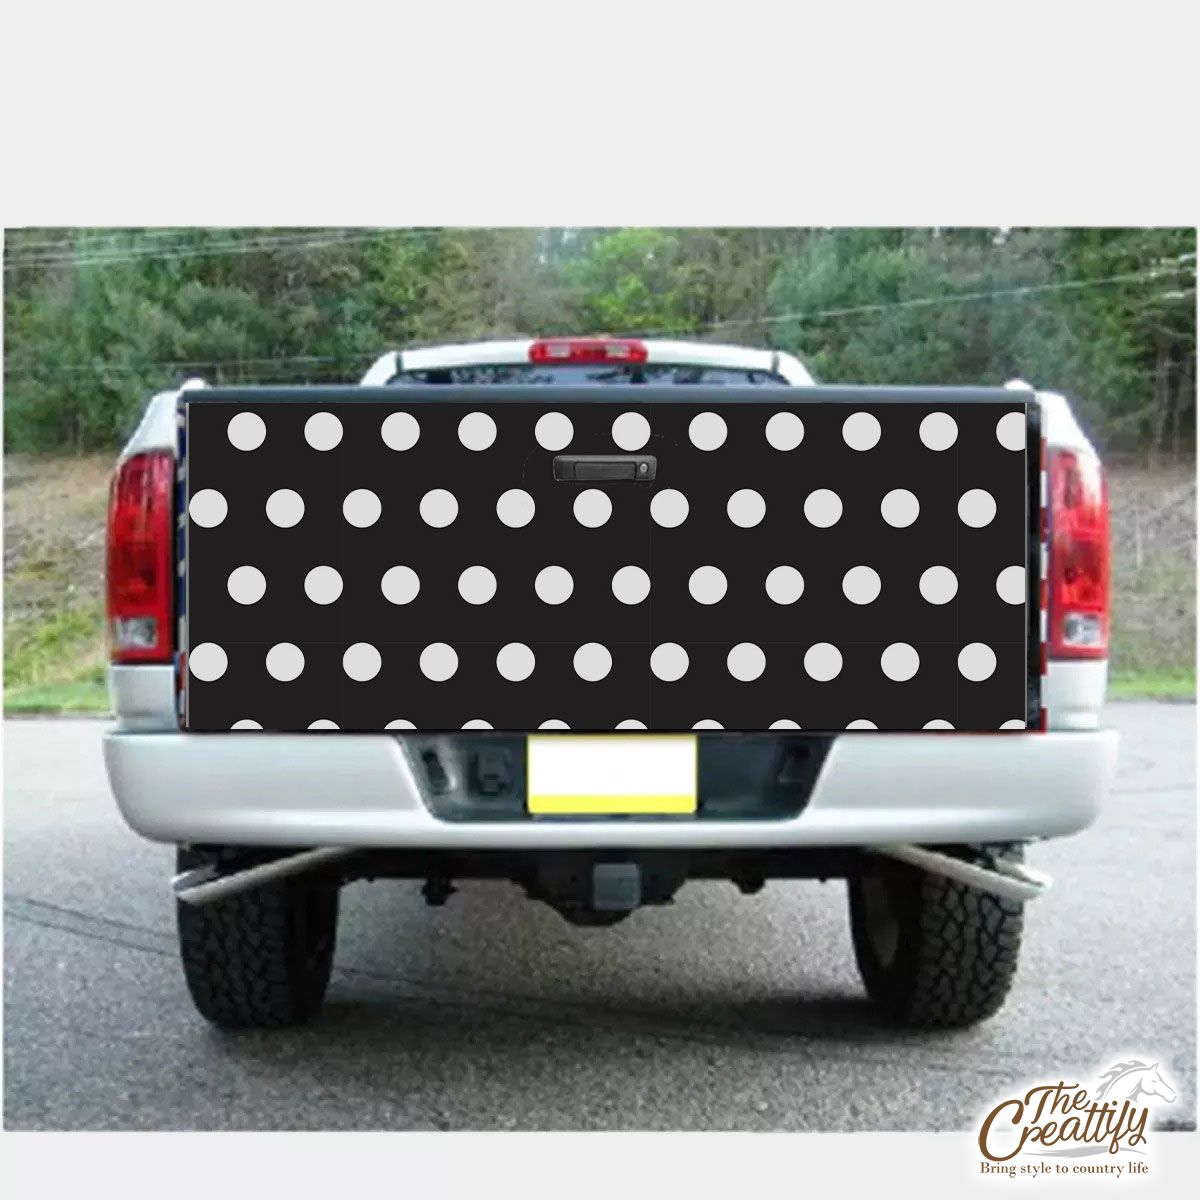 White Dot Pattern On Black Background Halloween Truck Bed Decal